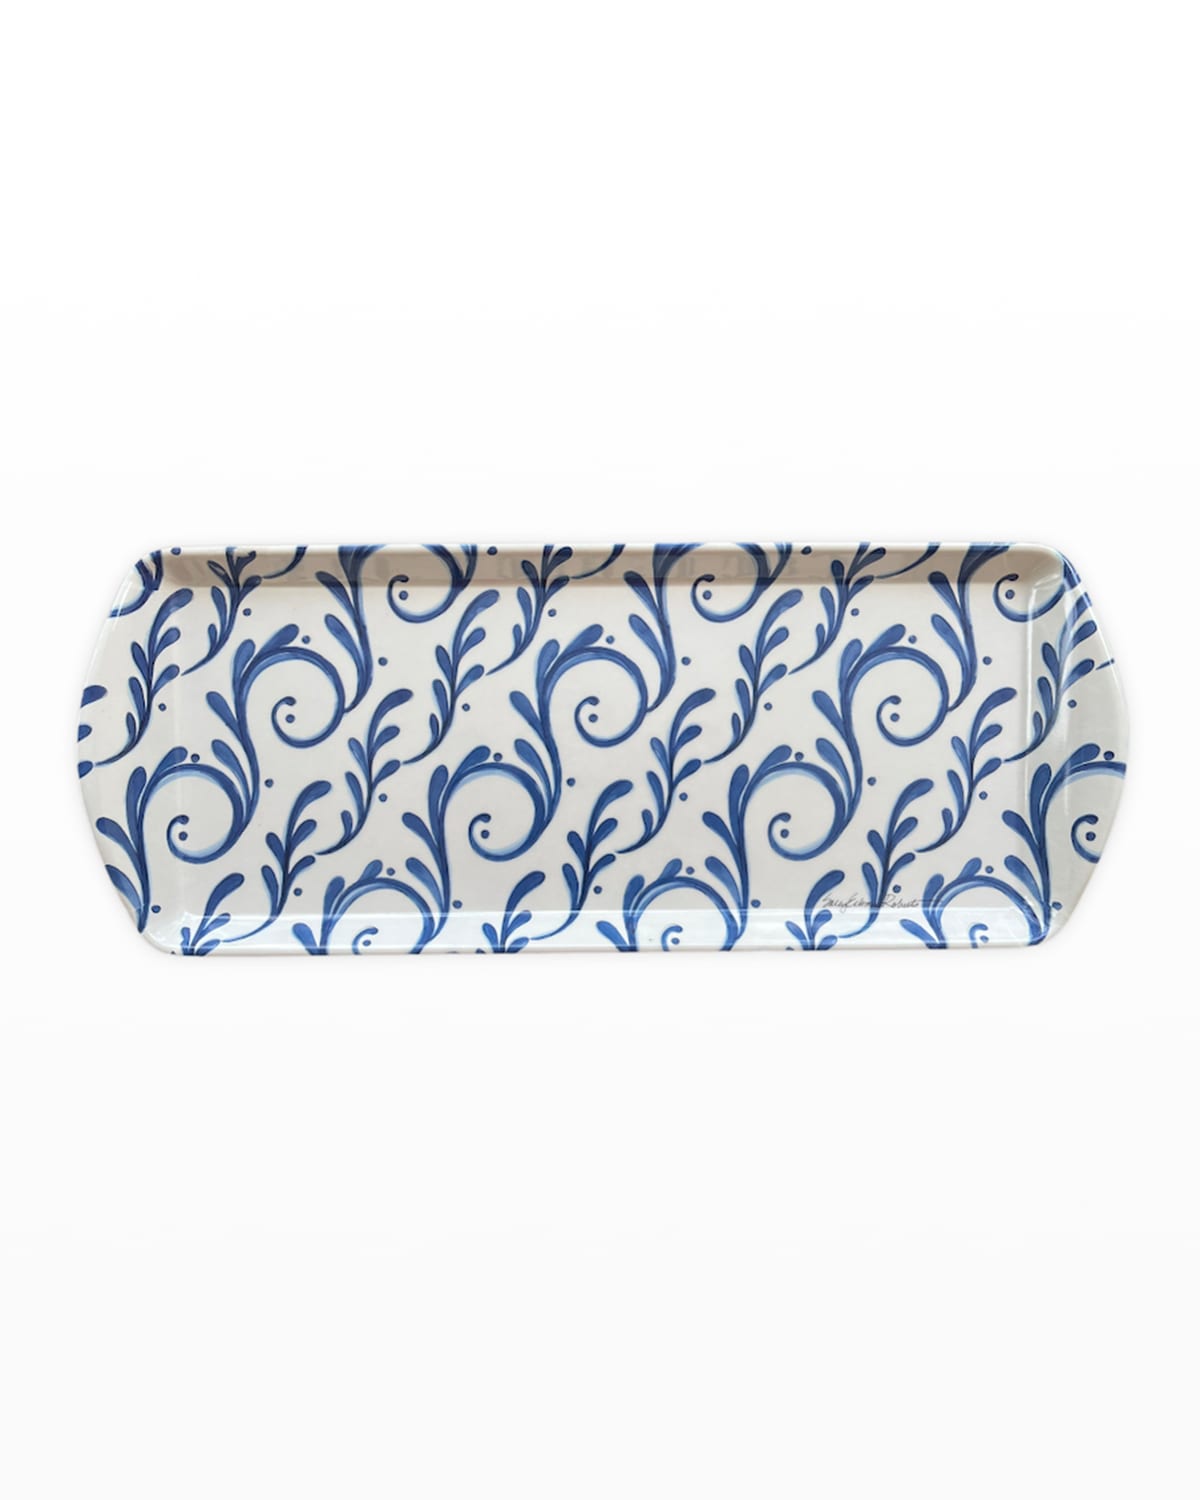 Shop Bamboo Table Indigo Song Loaf Tray In Blue And White